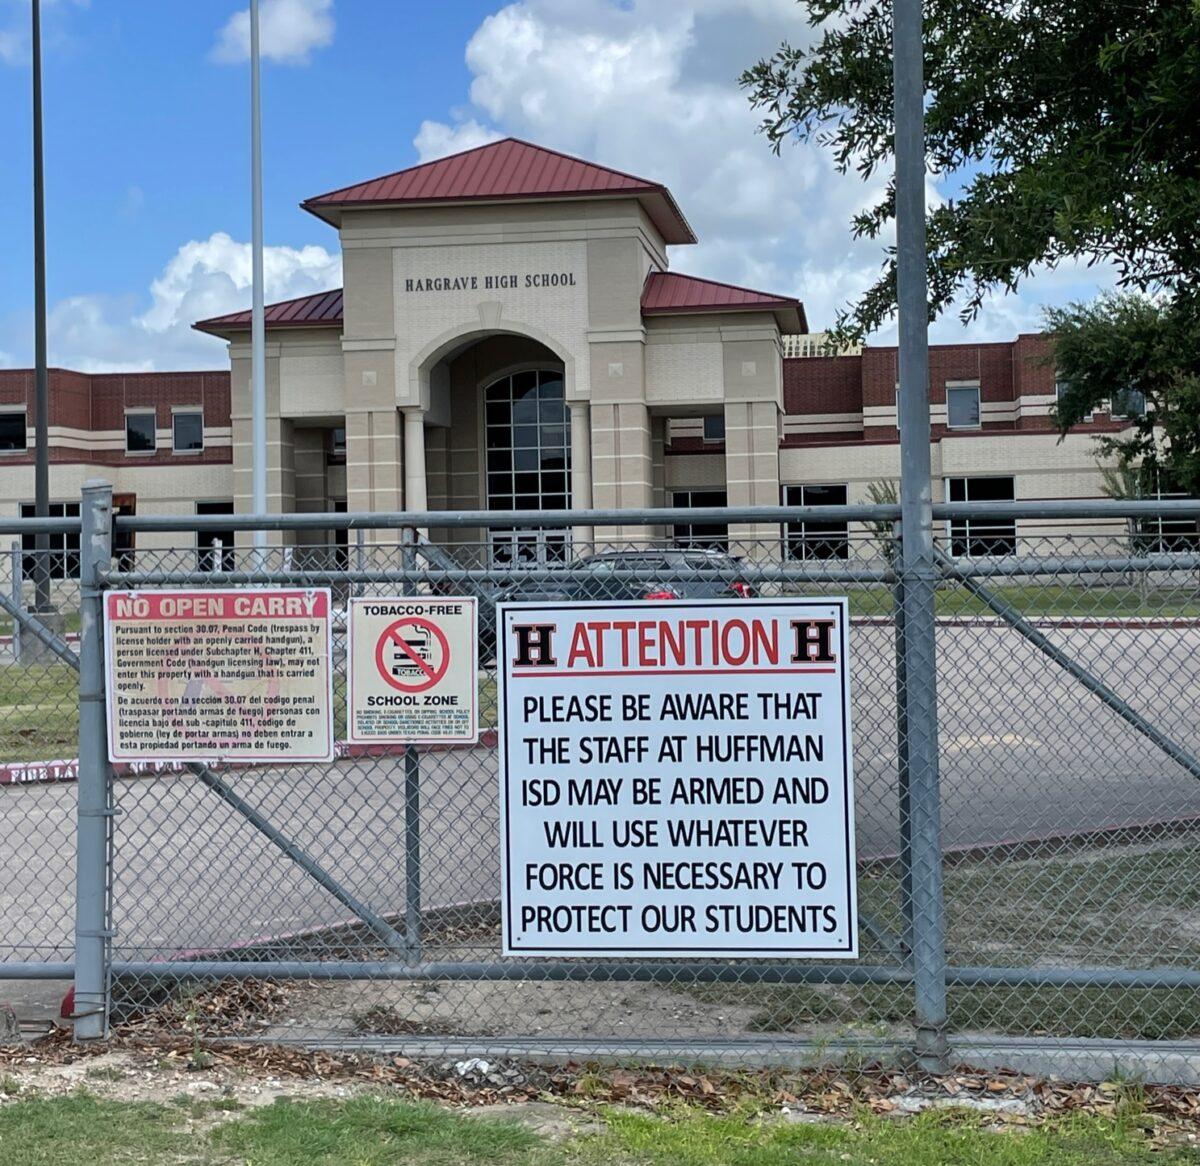 Signage at Hargrave High School in the Huffman Independent School District in Texas warns those who may enter school property with ill intent that open carry is prohibited and that staff may be armed with concealed weapons and will use whatever force is necessary to protect the students in their charge. (Courtesy of the Huffman Independent School District)